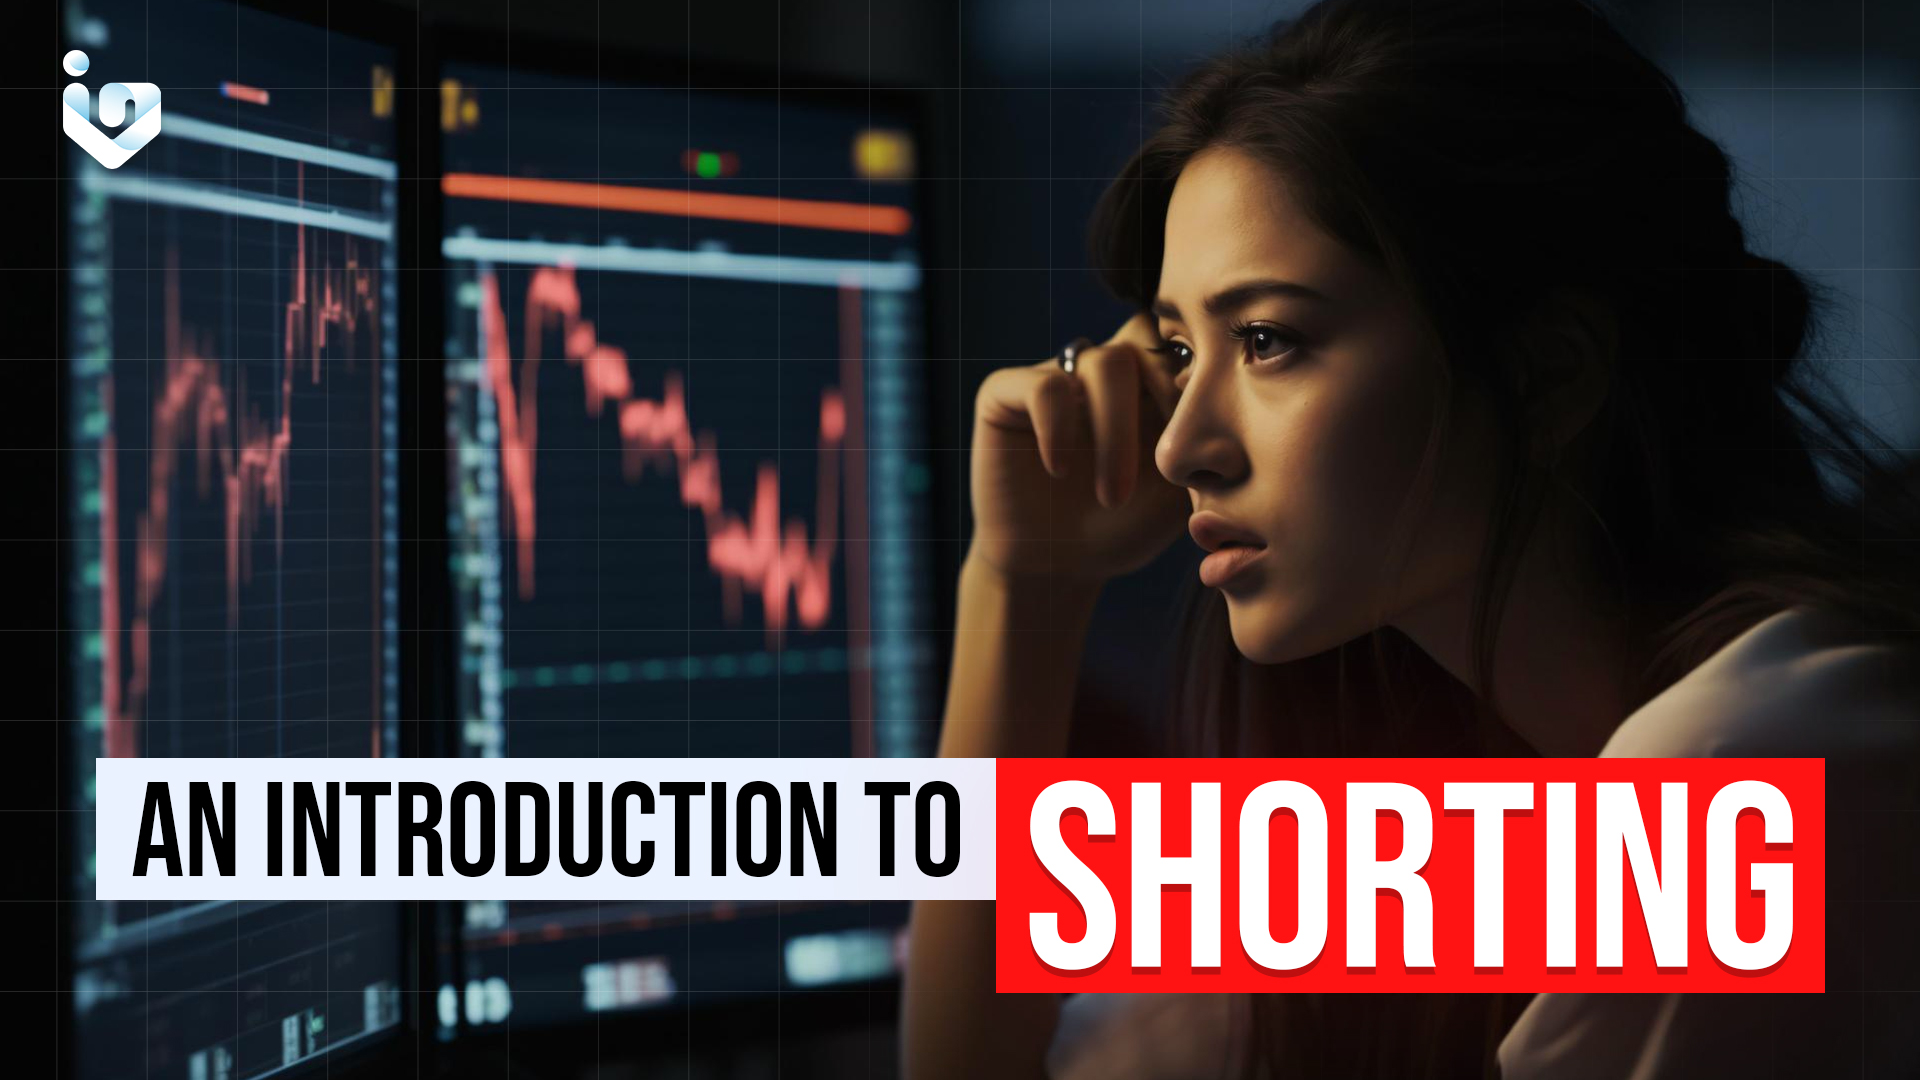 An Introduction to Shorting